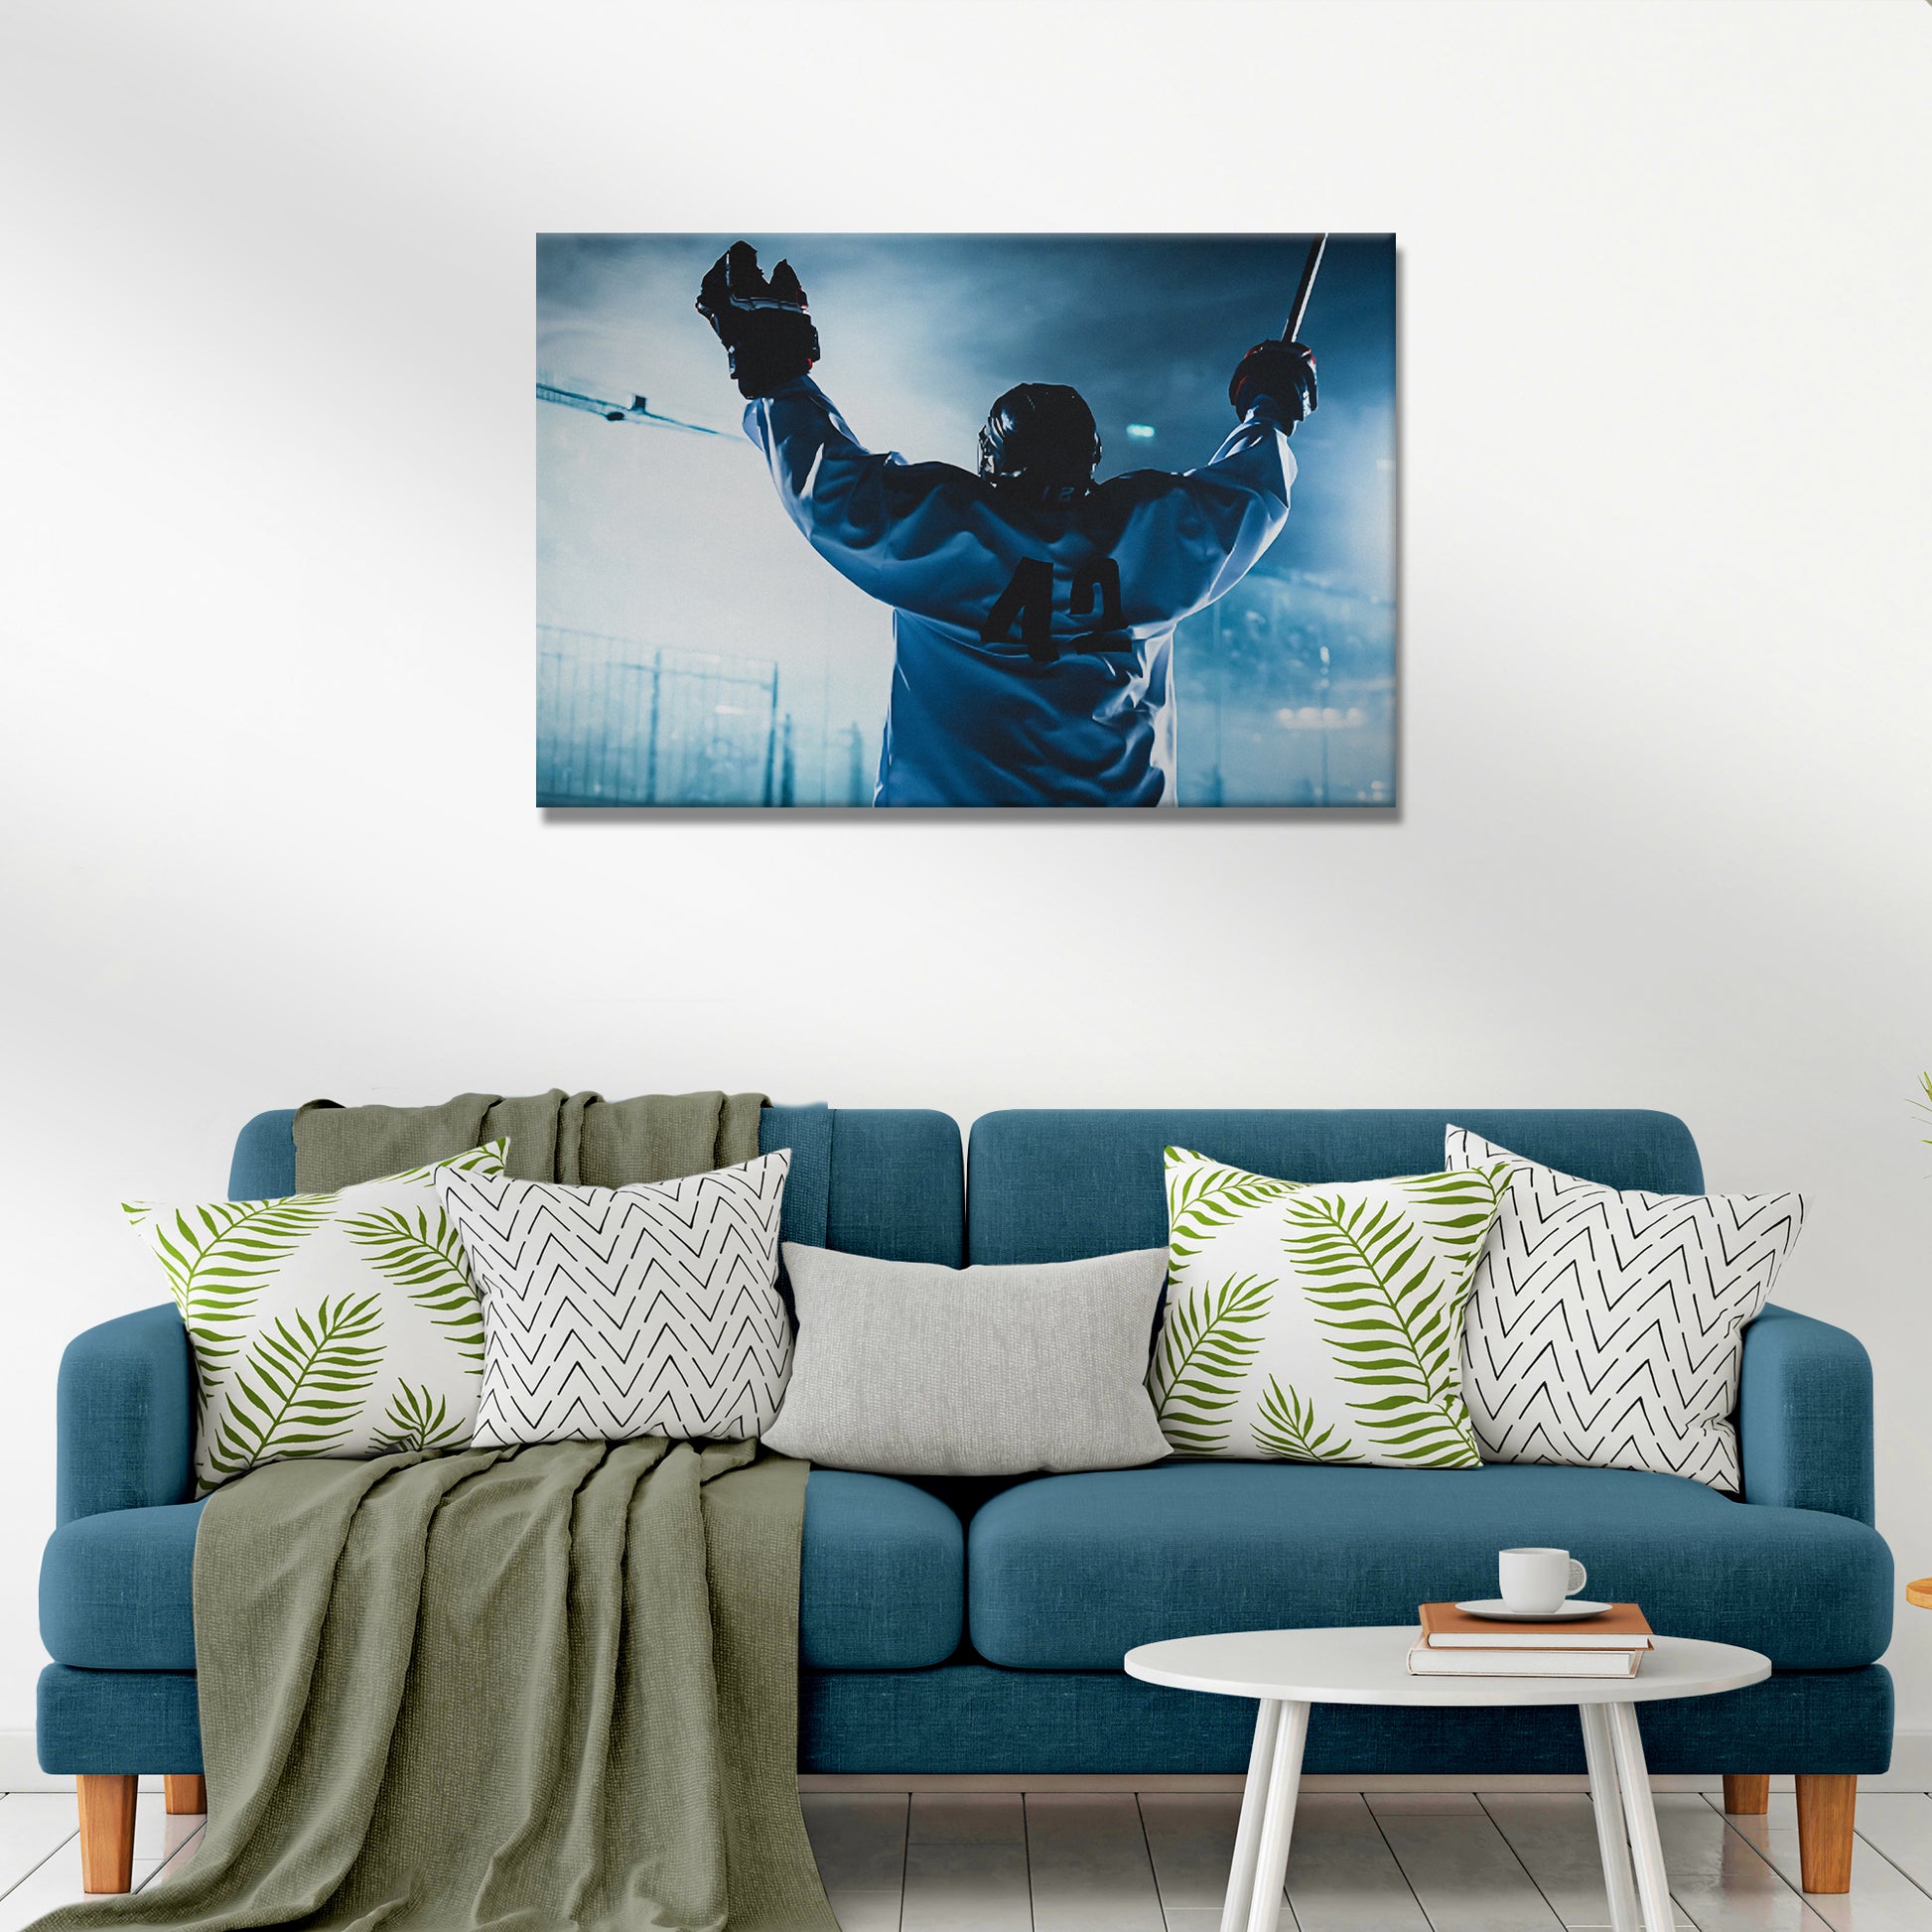 Ice Hockey Player Canvas Wall Art - Image by Tailored Canvases